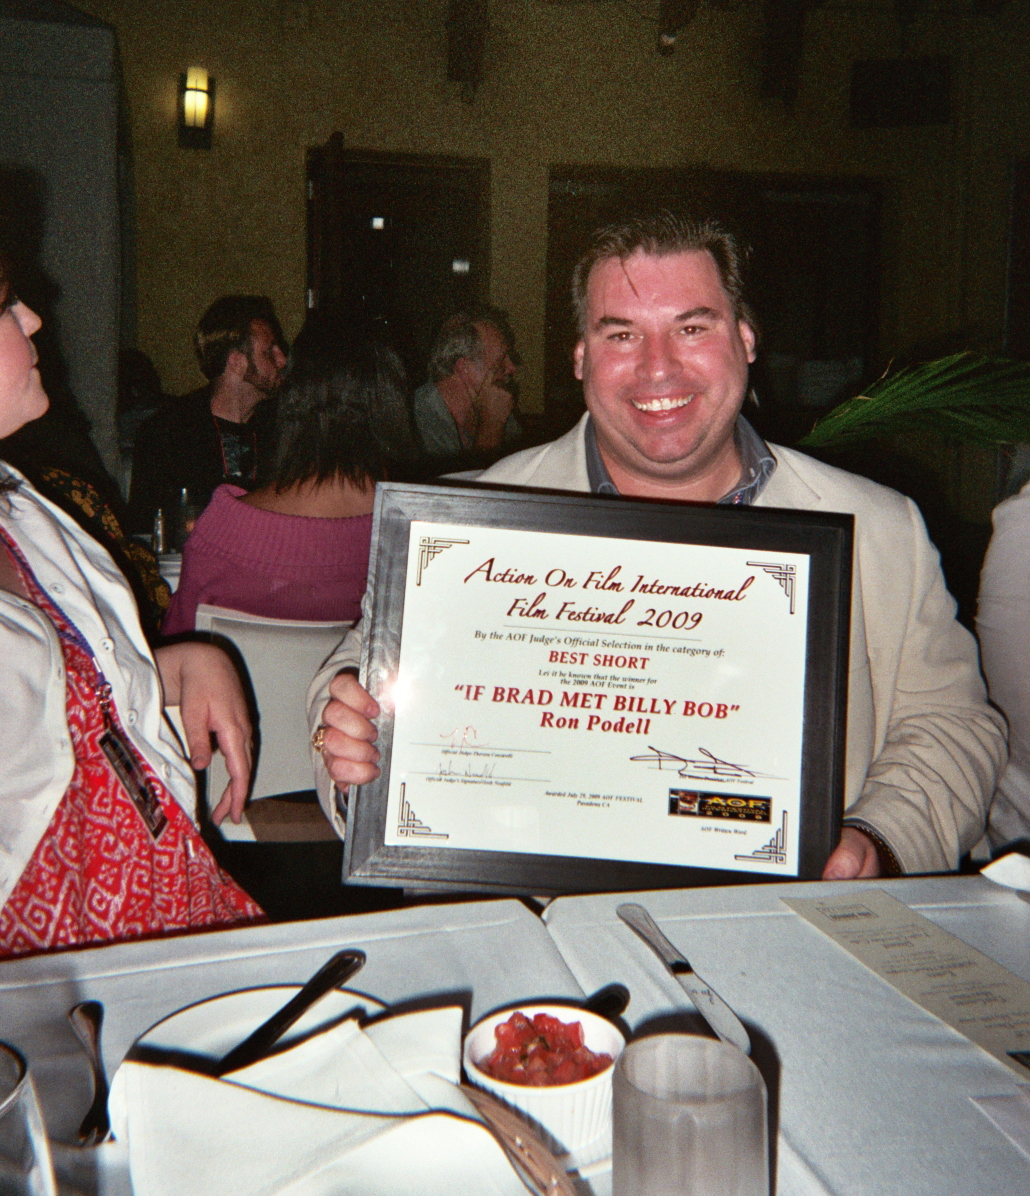 Ron Podell poses with his AOF Award for Best Short Screenplay 